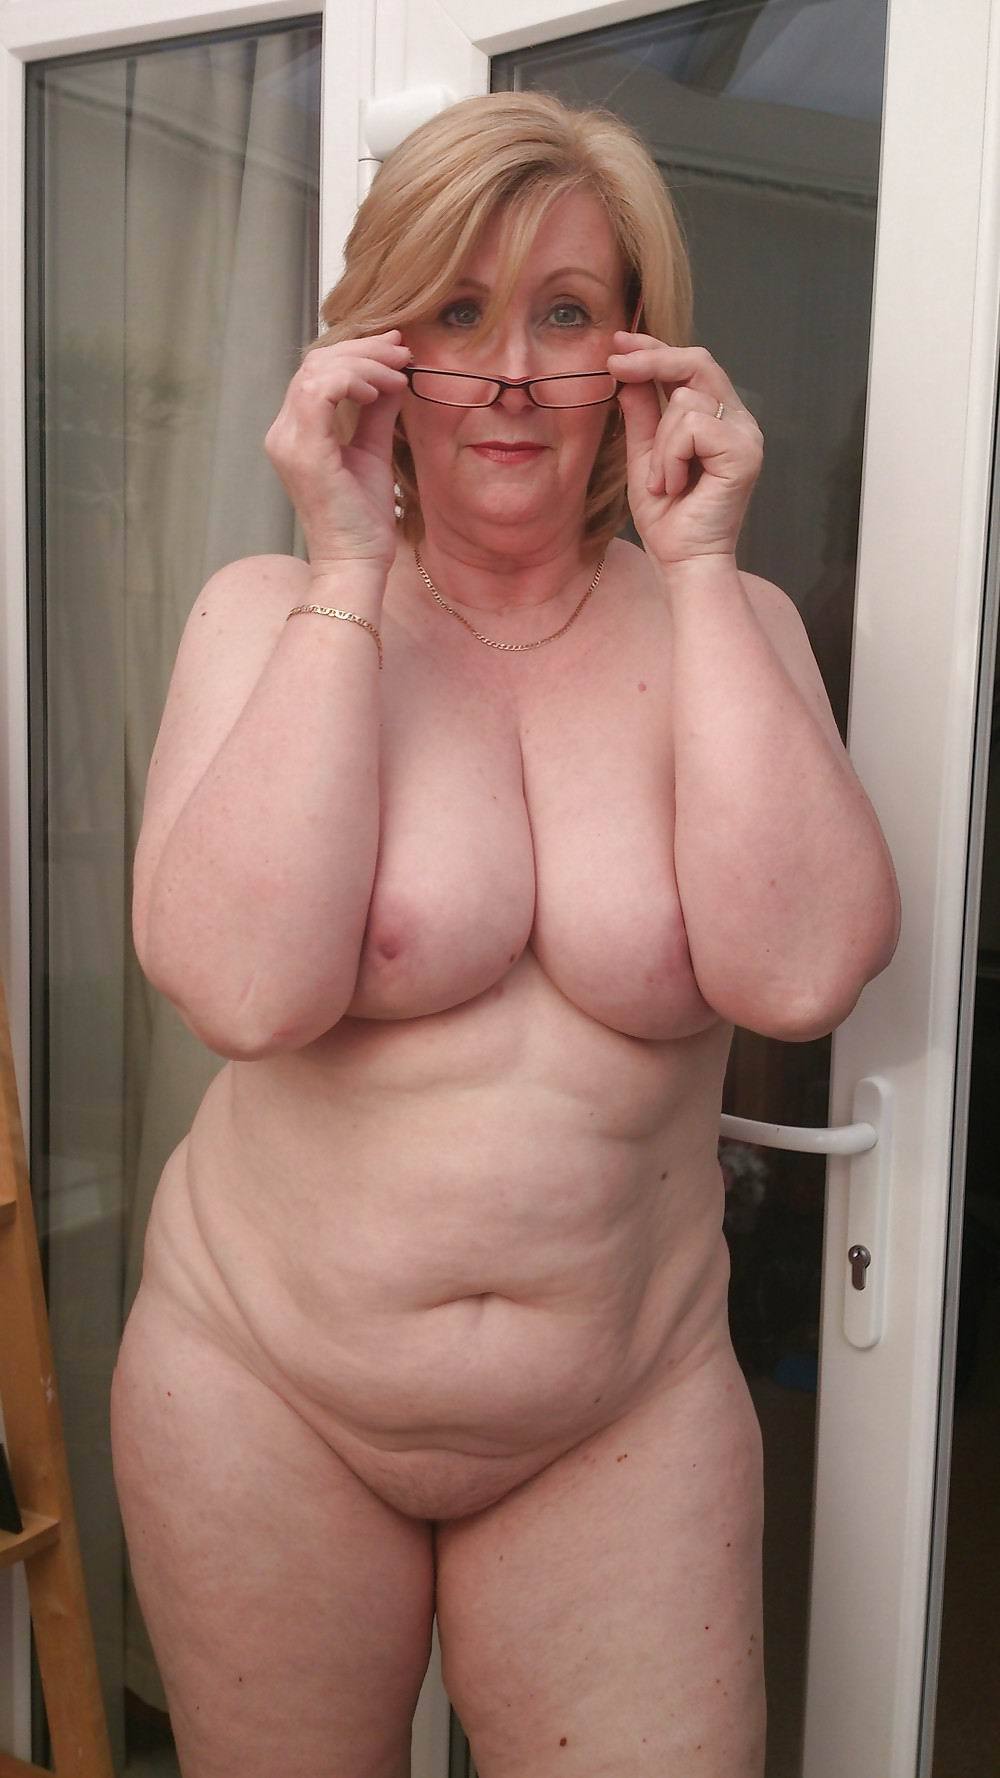 idirtyoldfucker:  olgrlz66:  Luv to get all this jiggling  Sexy sexy   Flab can be